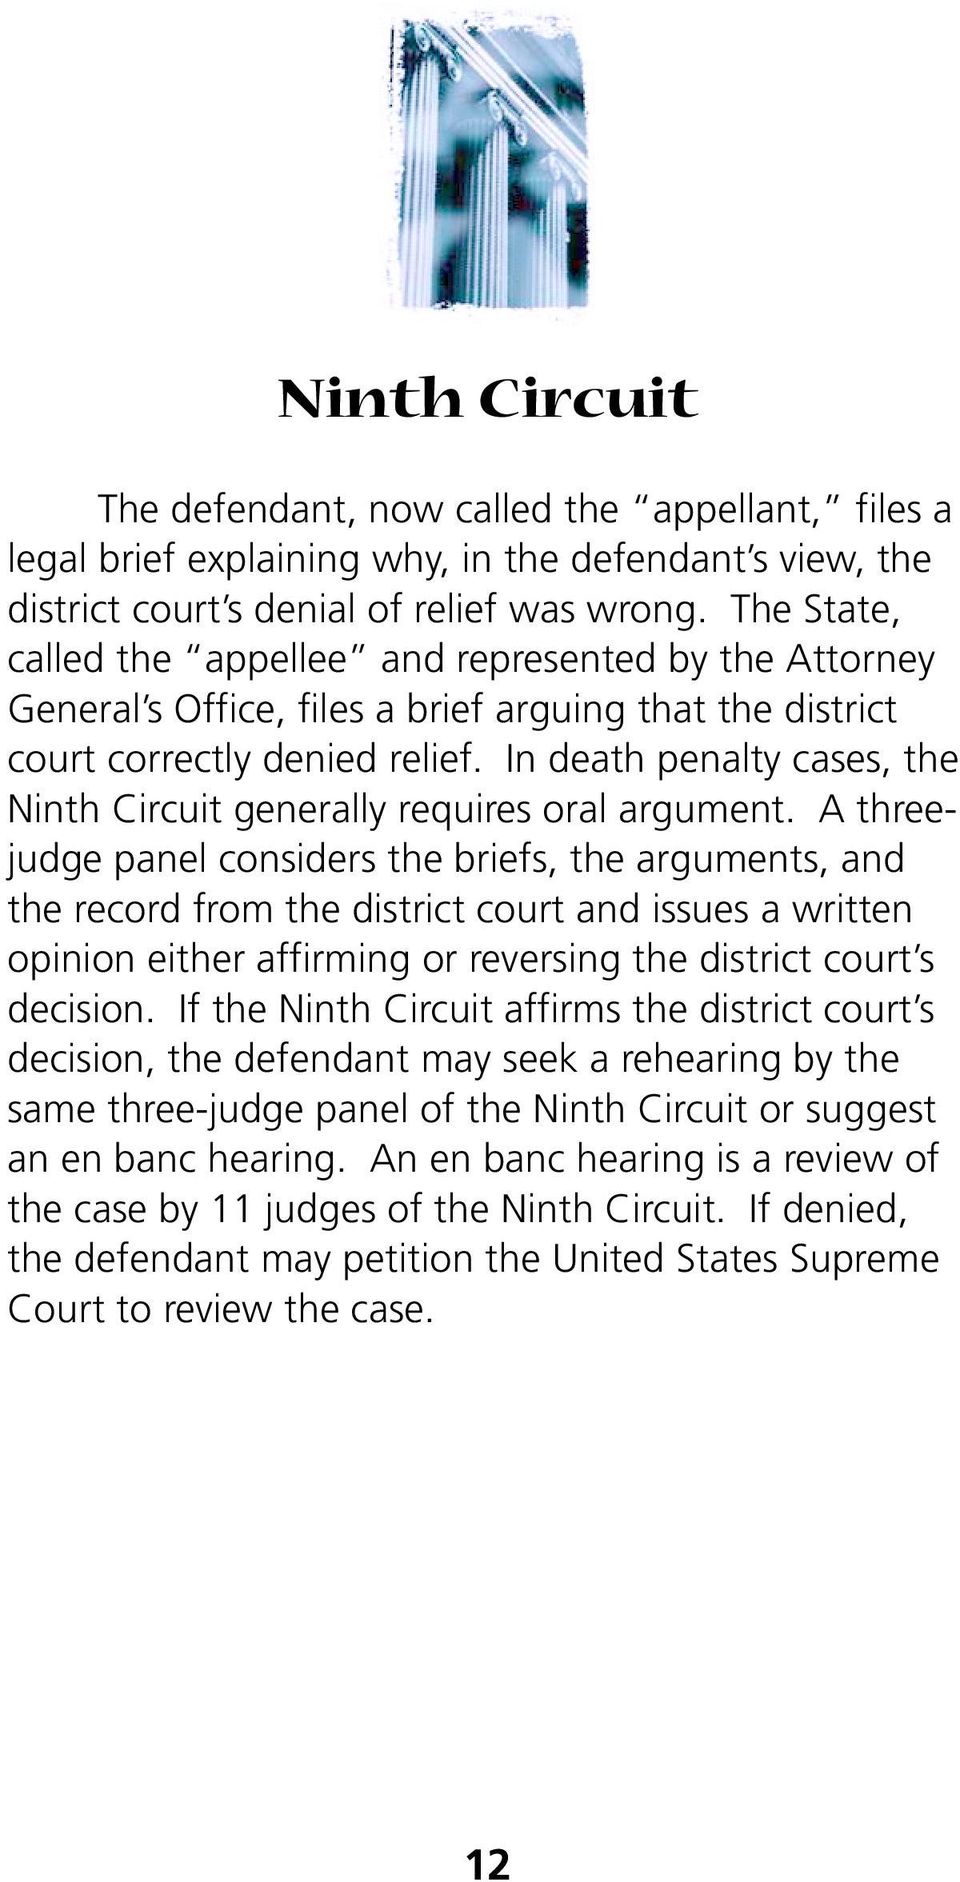 In death penalty cases, the Ninth Circuit generally requires oral argument.